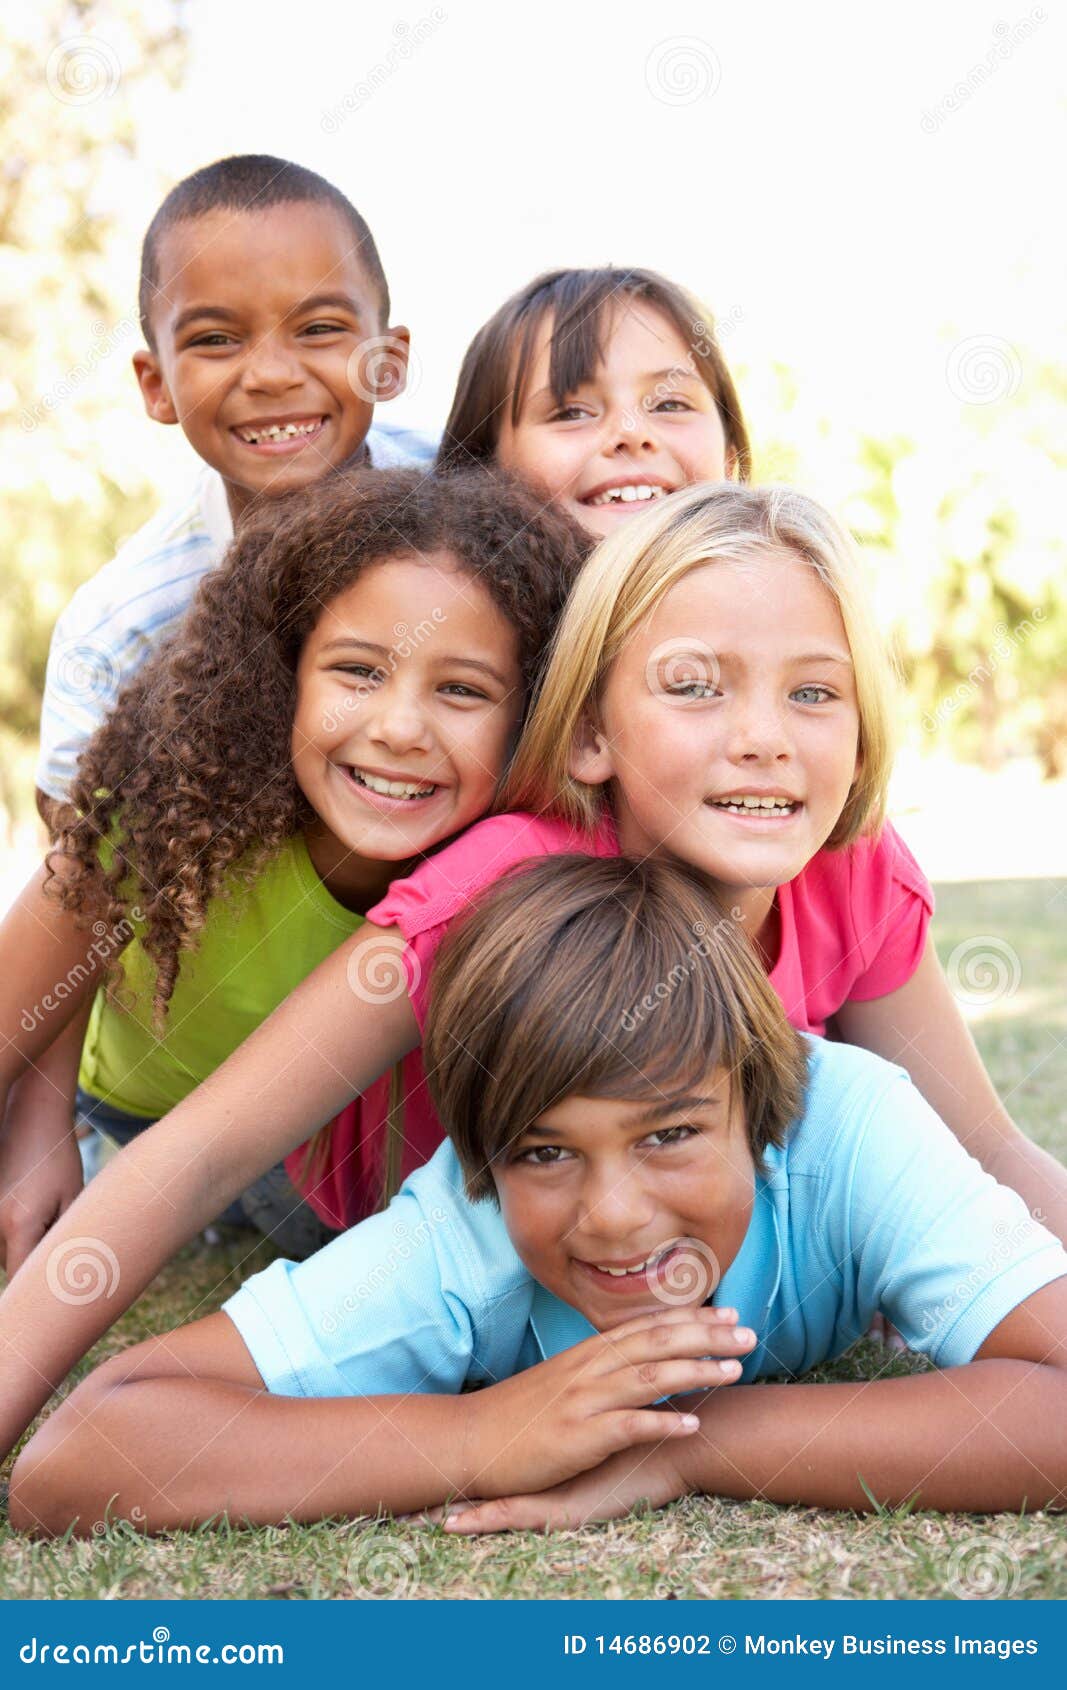 group of children piled up in park